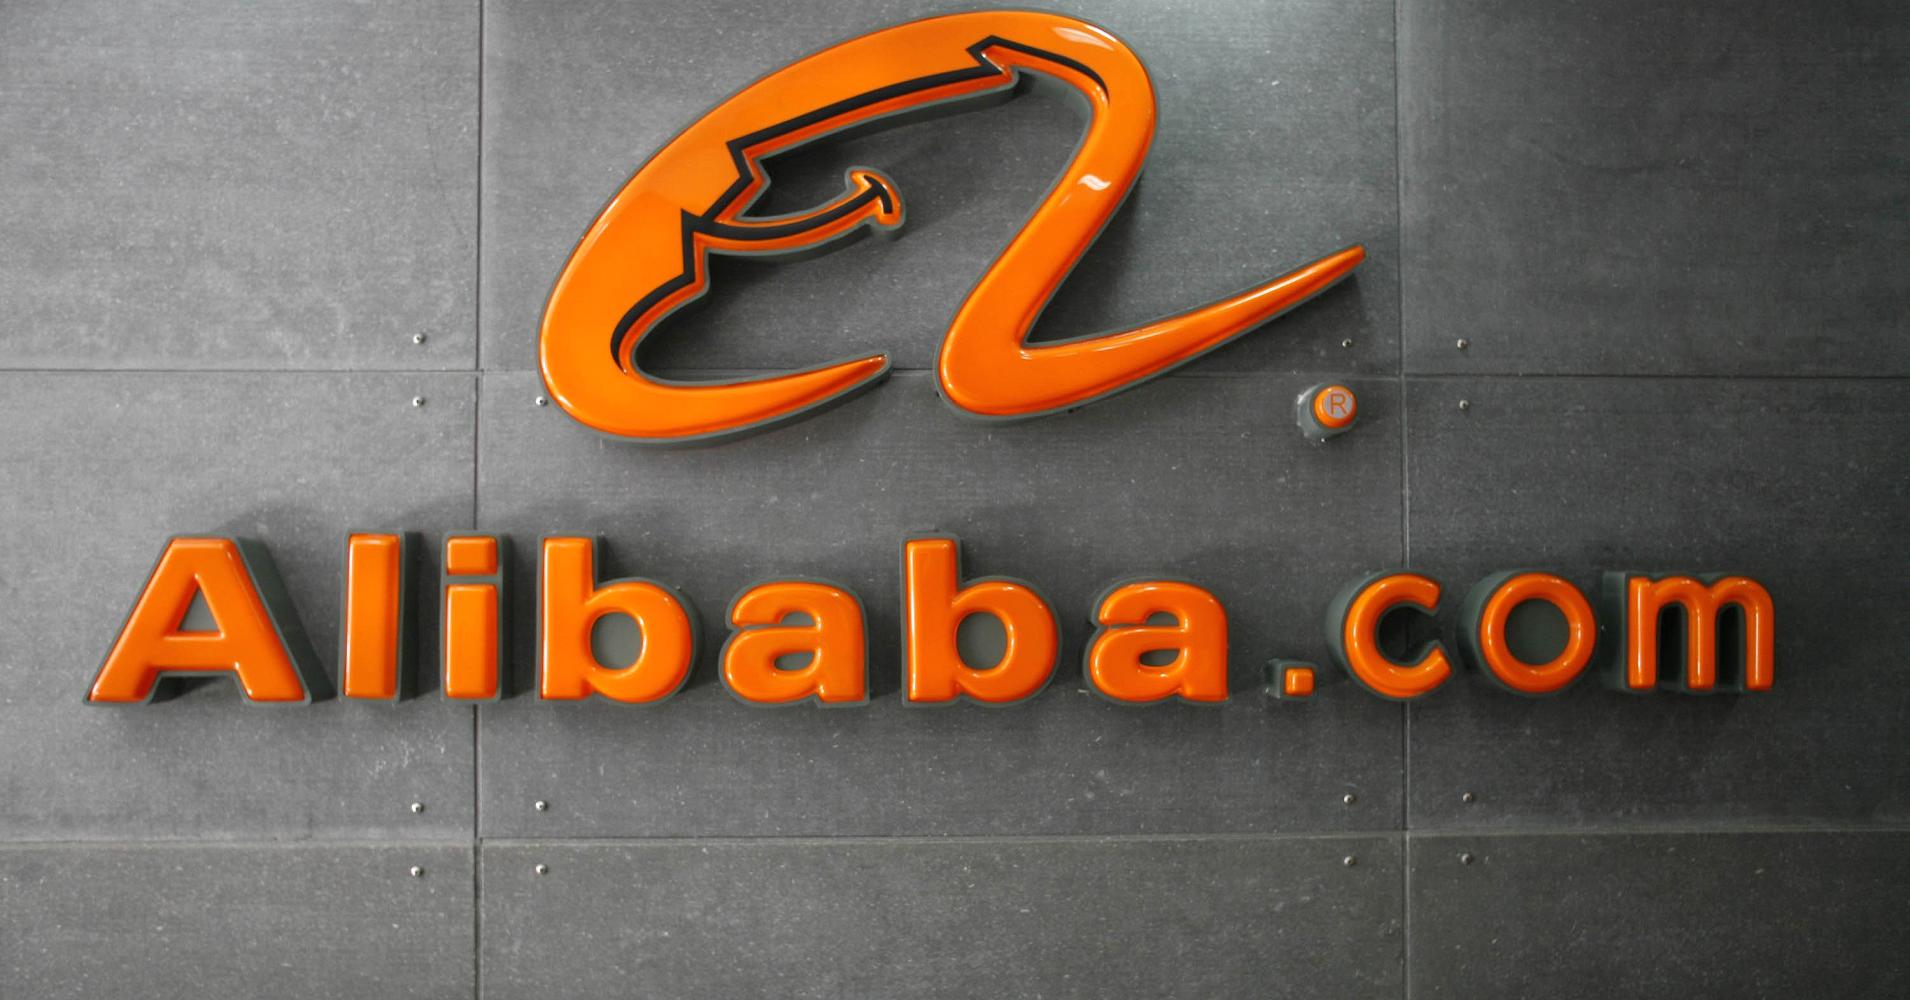 Why Alibaba is the giant Australian retailers should really be worried